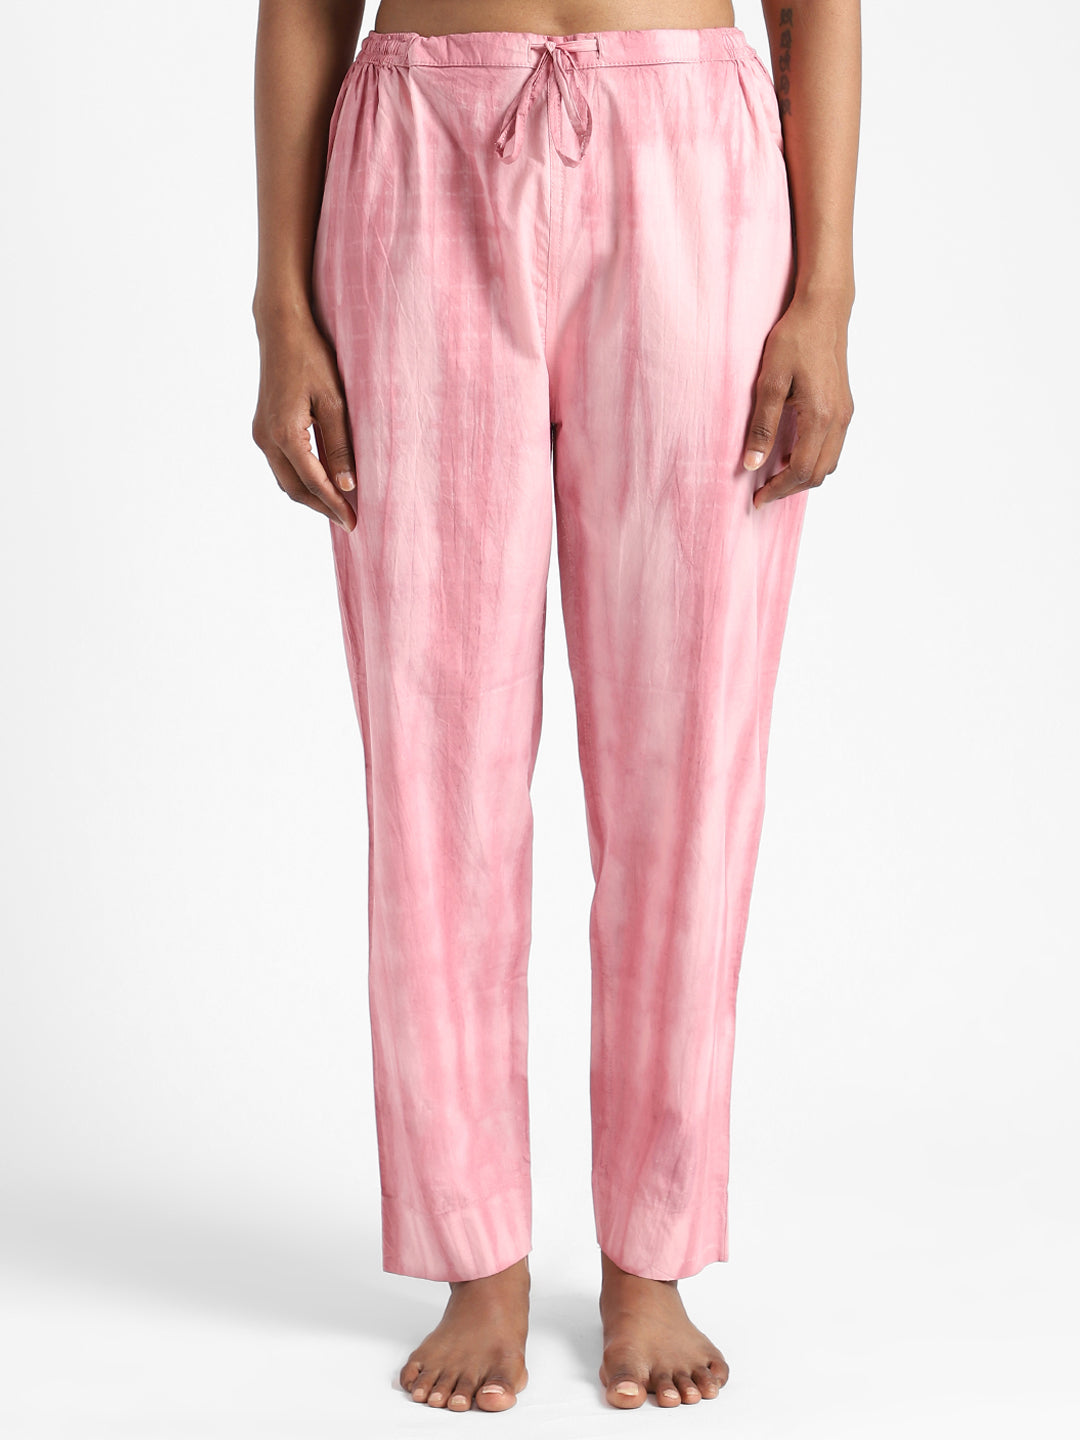 Earth Pink Women's Organic Cotton & Natural Dyed Slim Fit Tie & Dye Pants